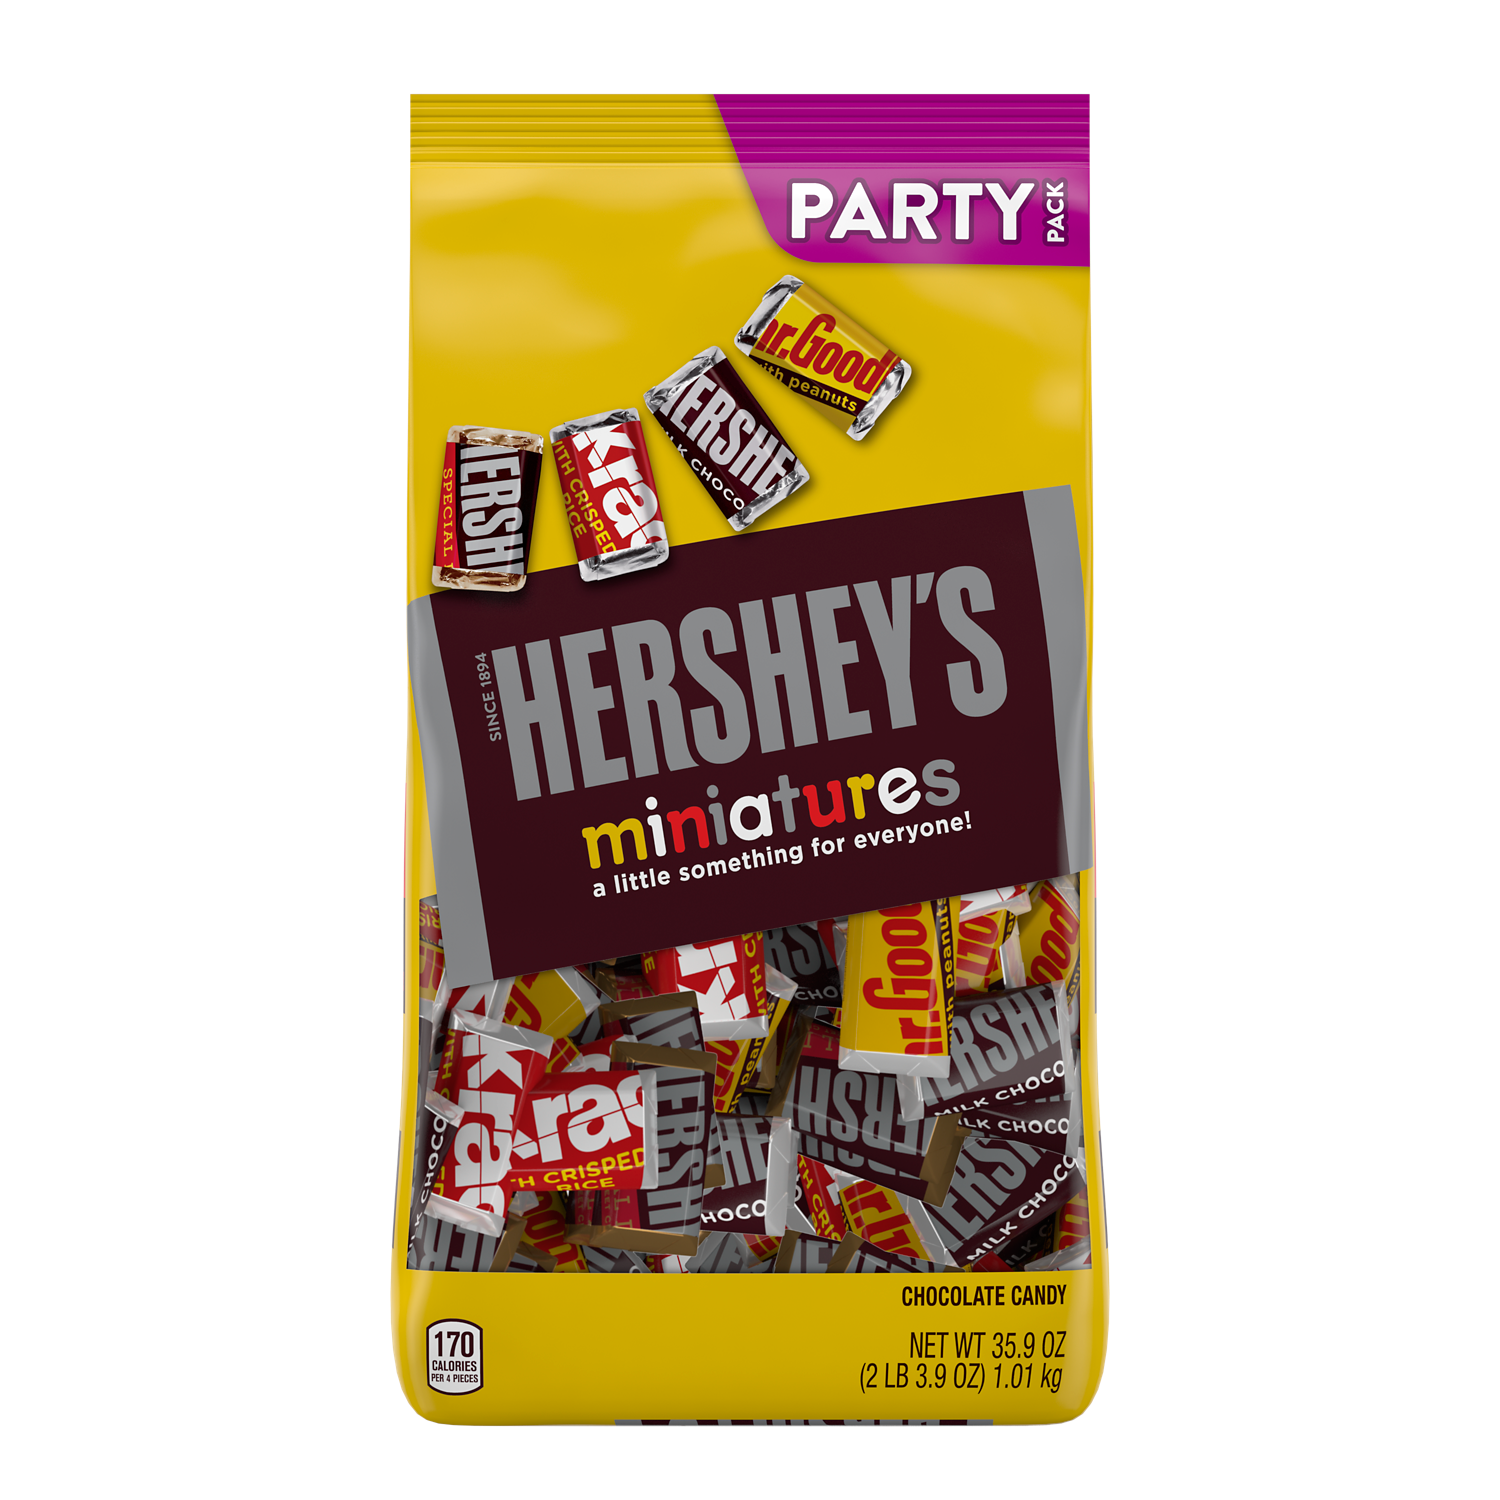 HERSHEY'S Miniatures Assortment, 35.6 oz pack, 9 count - Front of Package